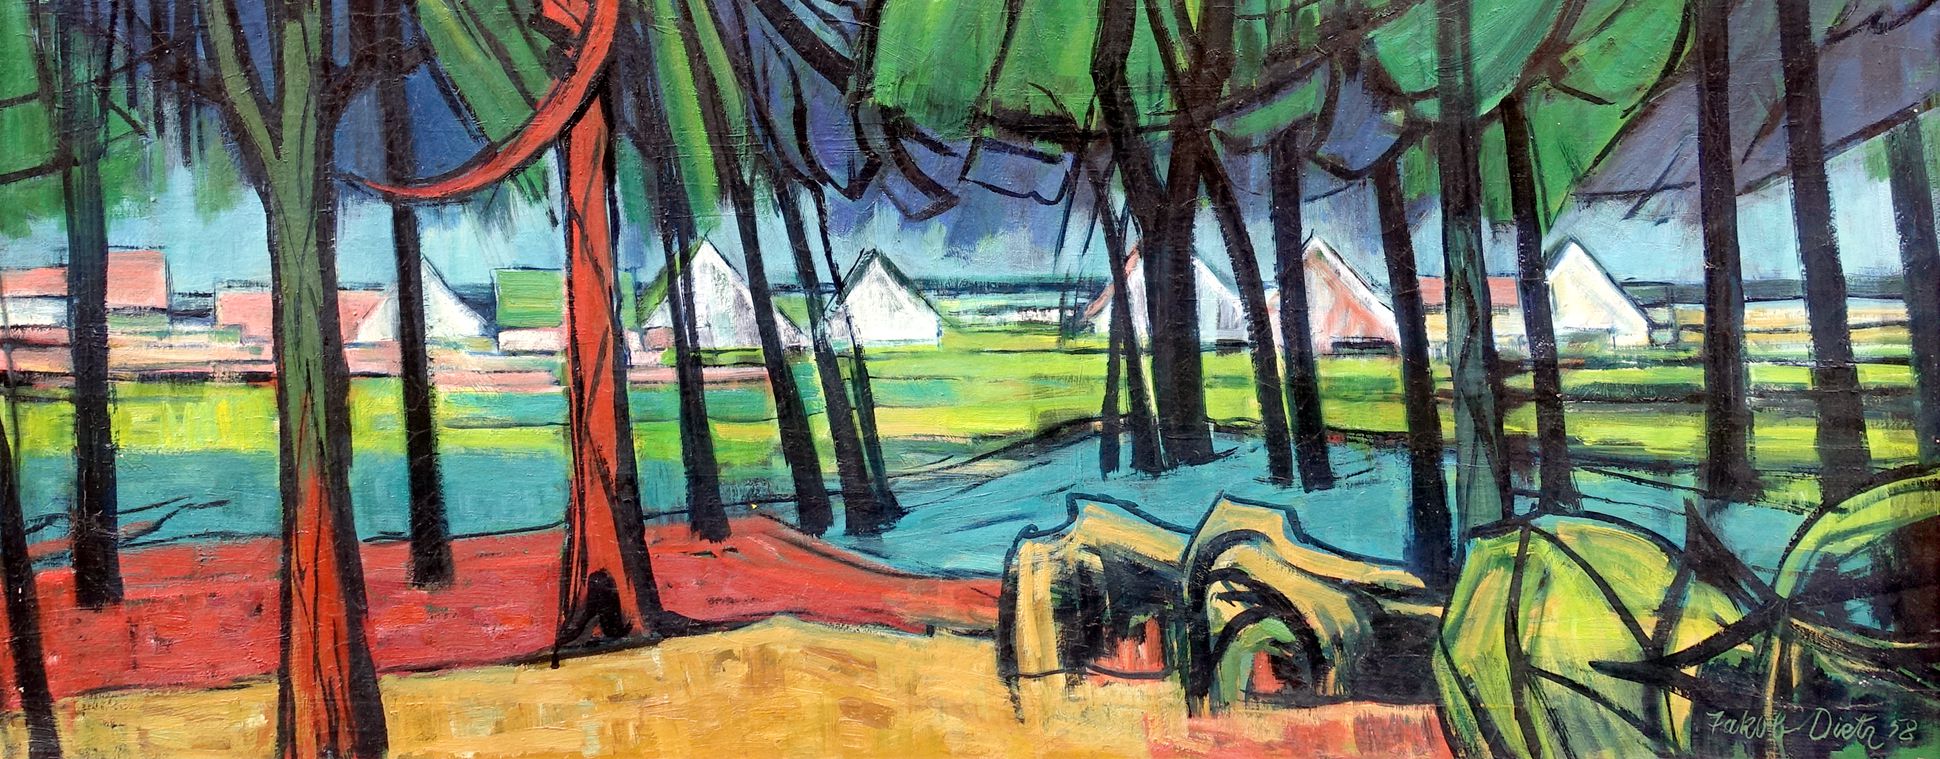 In Knoblauchsland Detail, horizon of the picture